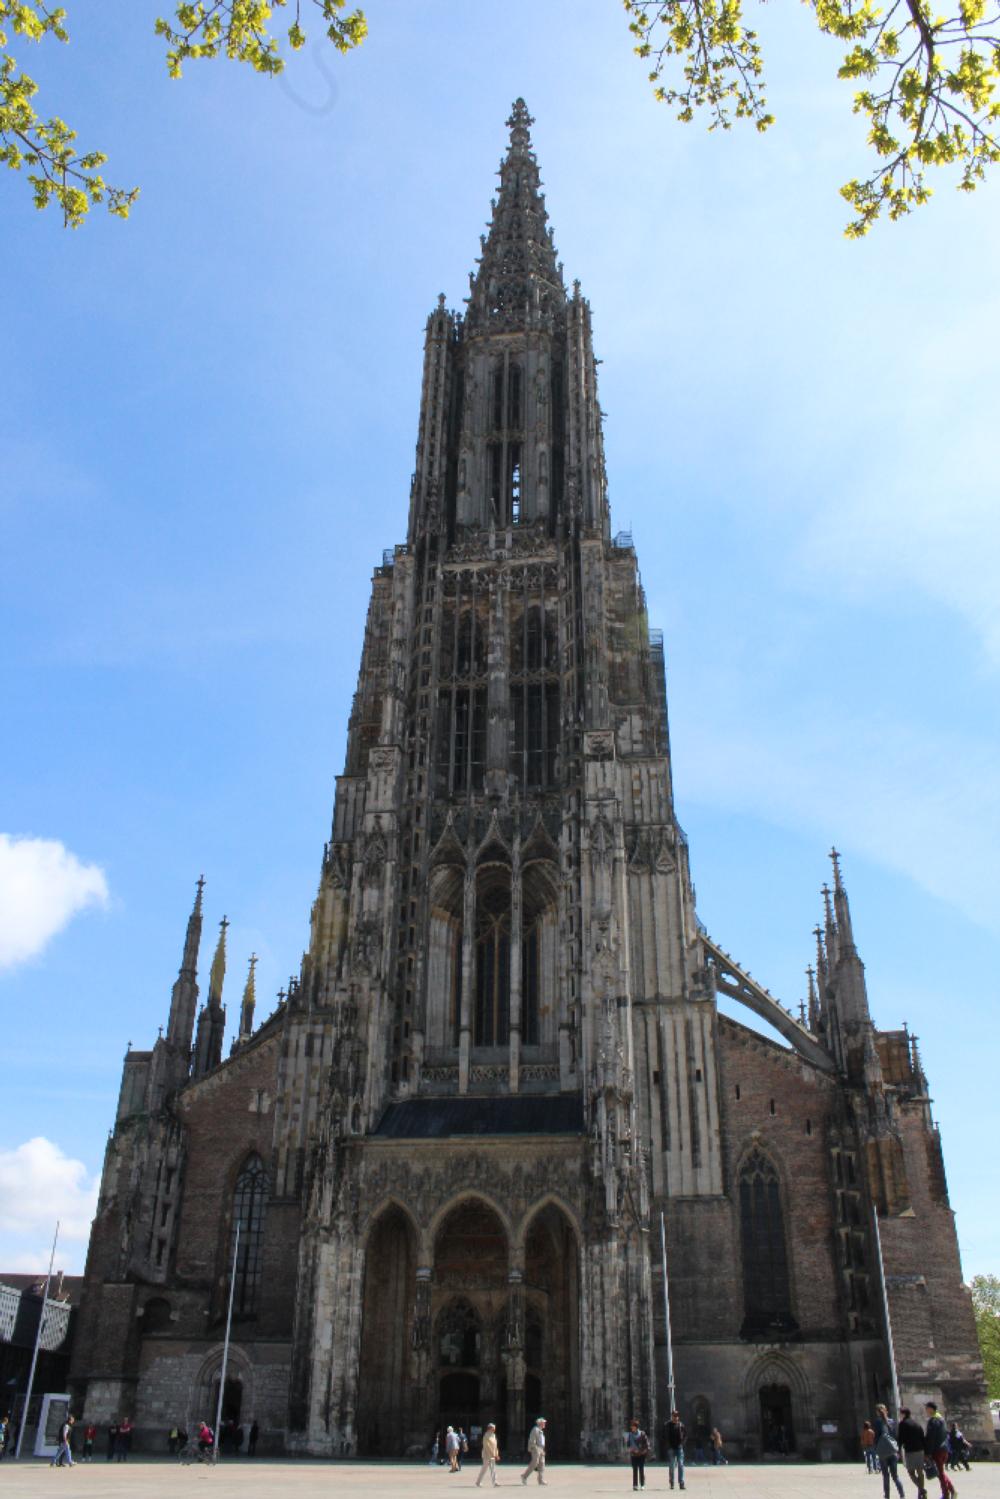 Ulm Cathedral